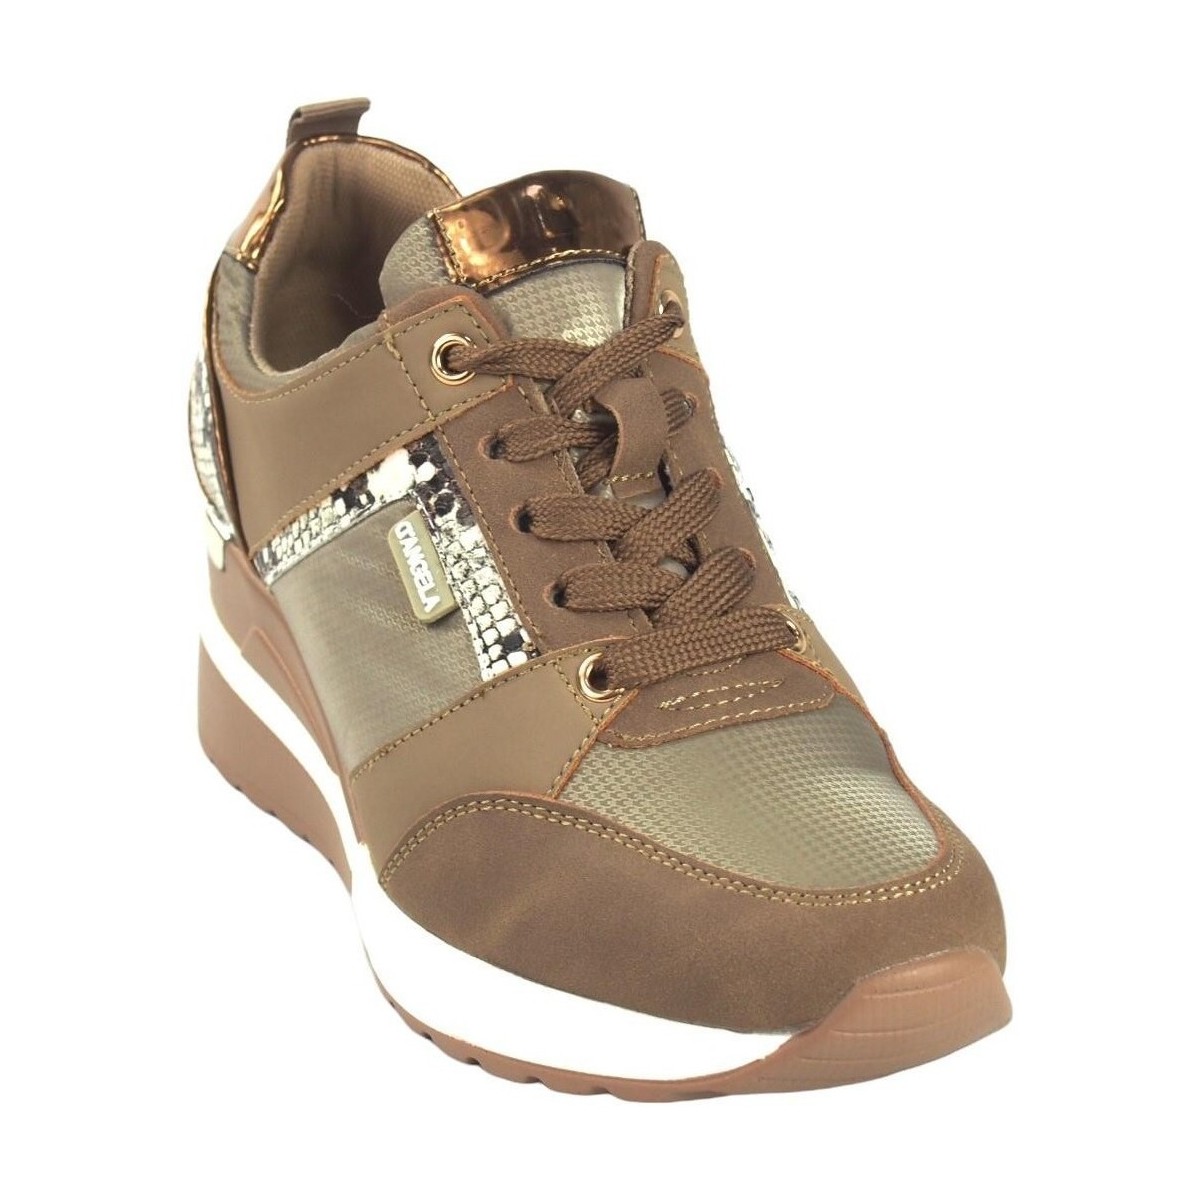 Chaussures Femme Multisport D'angela Chaussure femme    22036 dbd taupe Multicolore